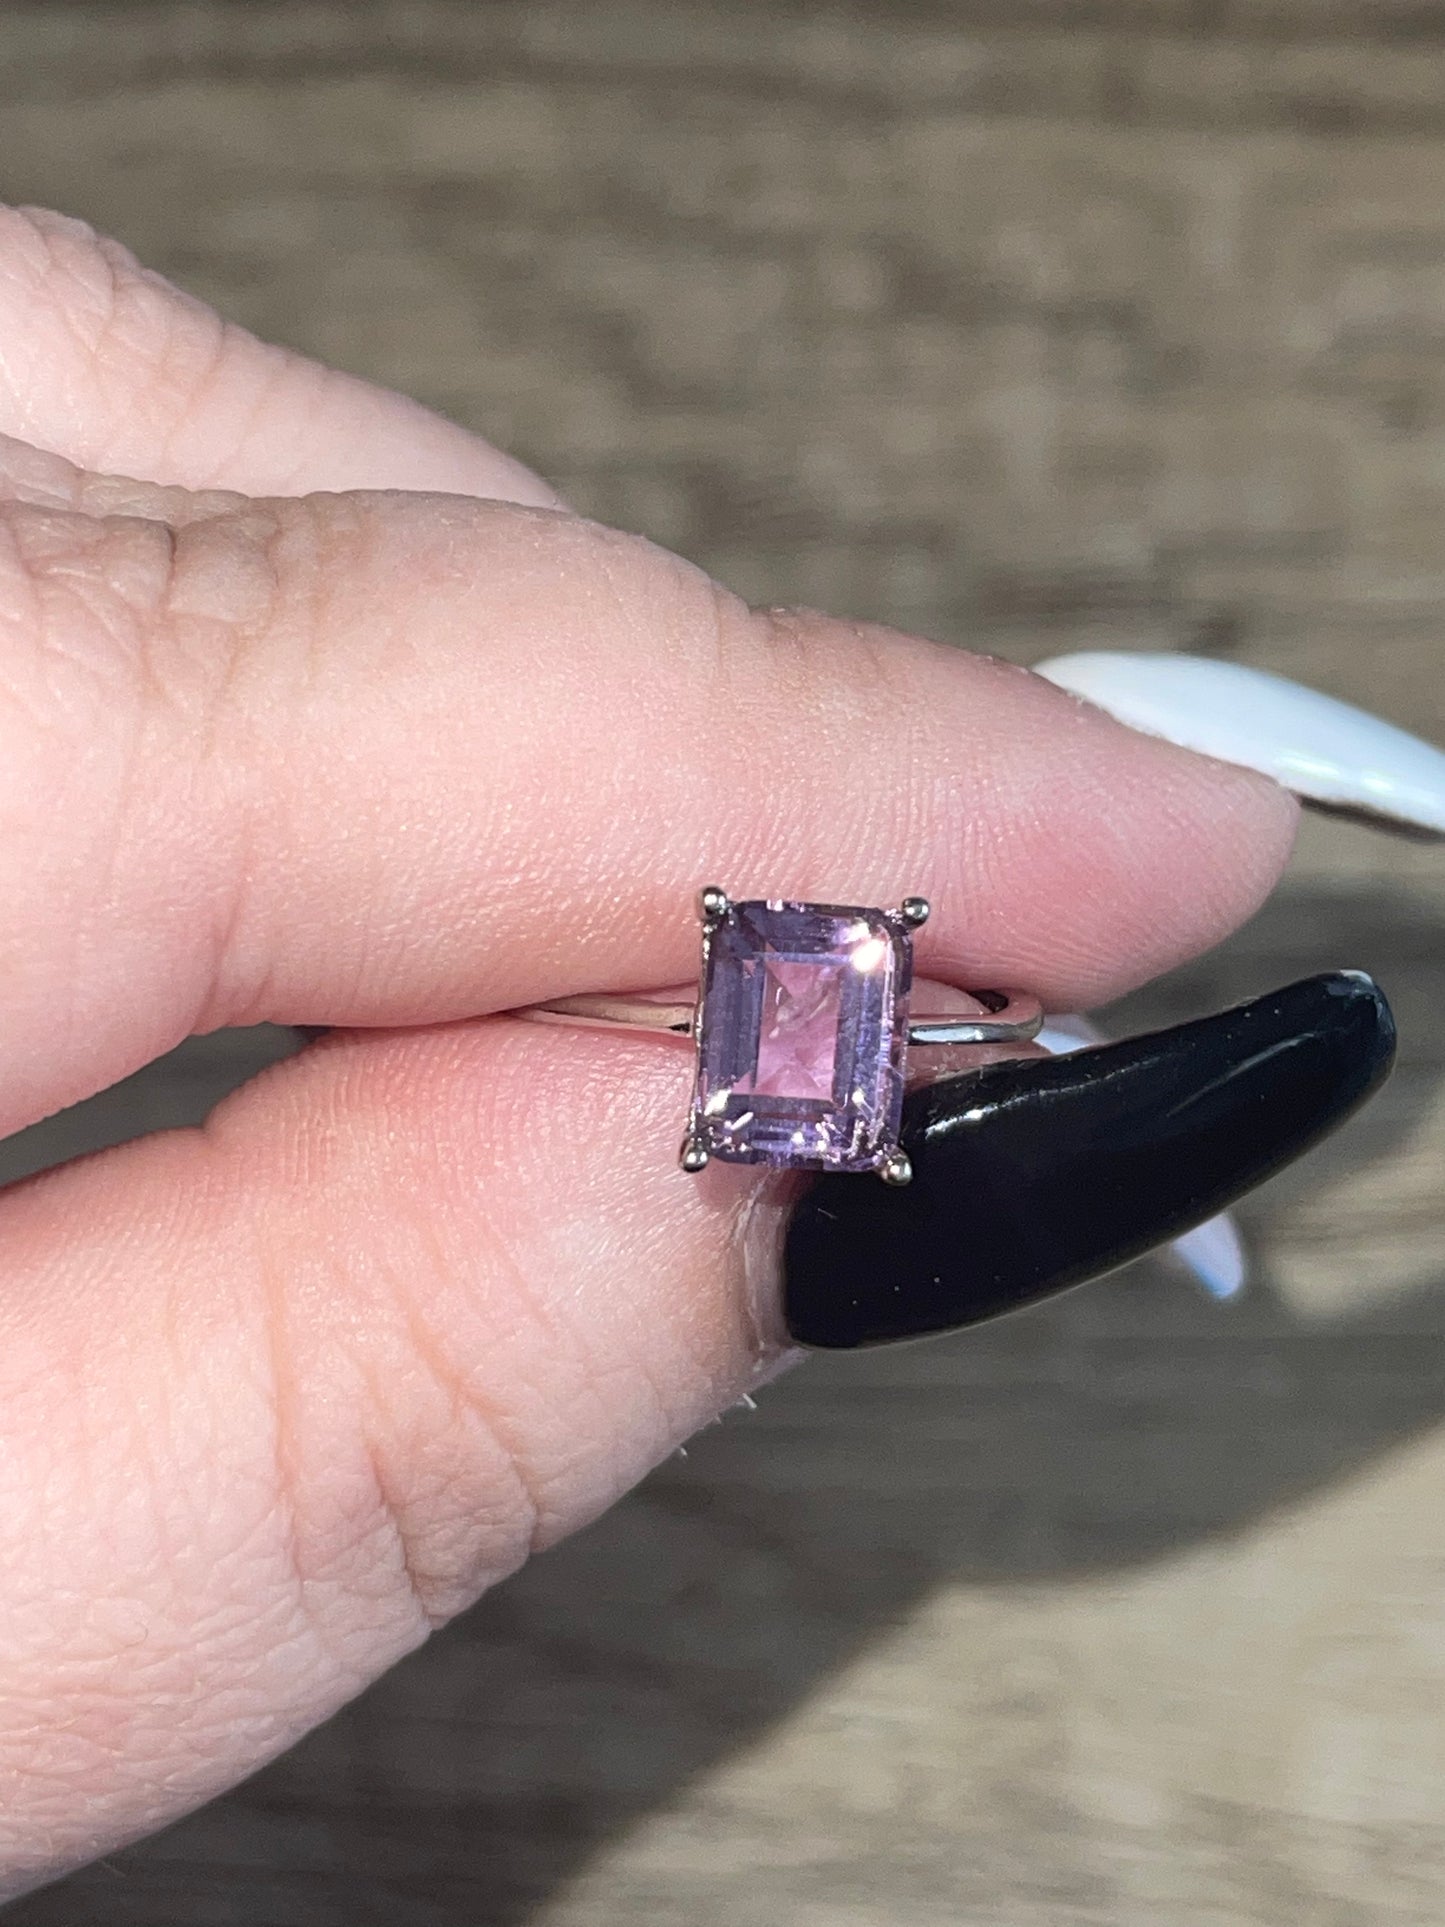 AMETHYST RING - Stress Relief, Protection, Sleep Aid